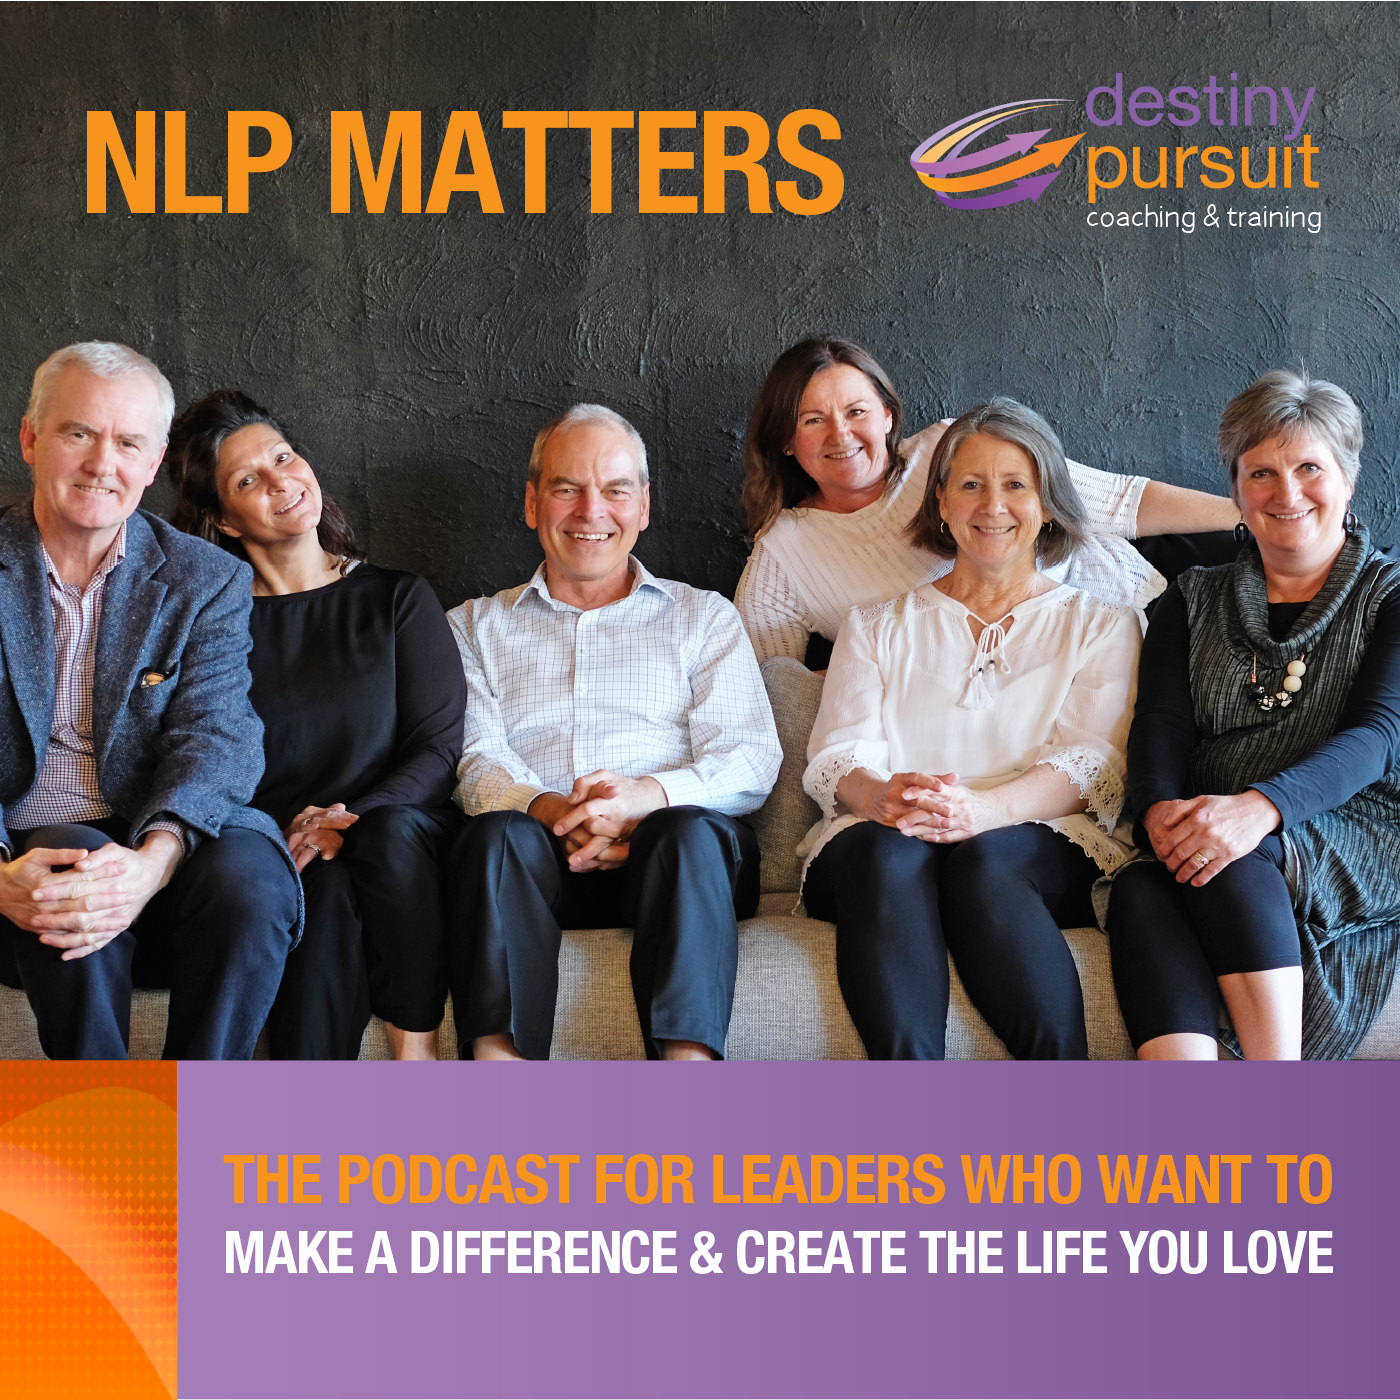 Our State, Emotions, and the Role They Play - NLP Matters, Episode #040